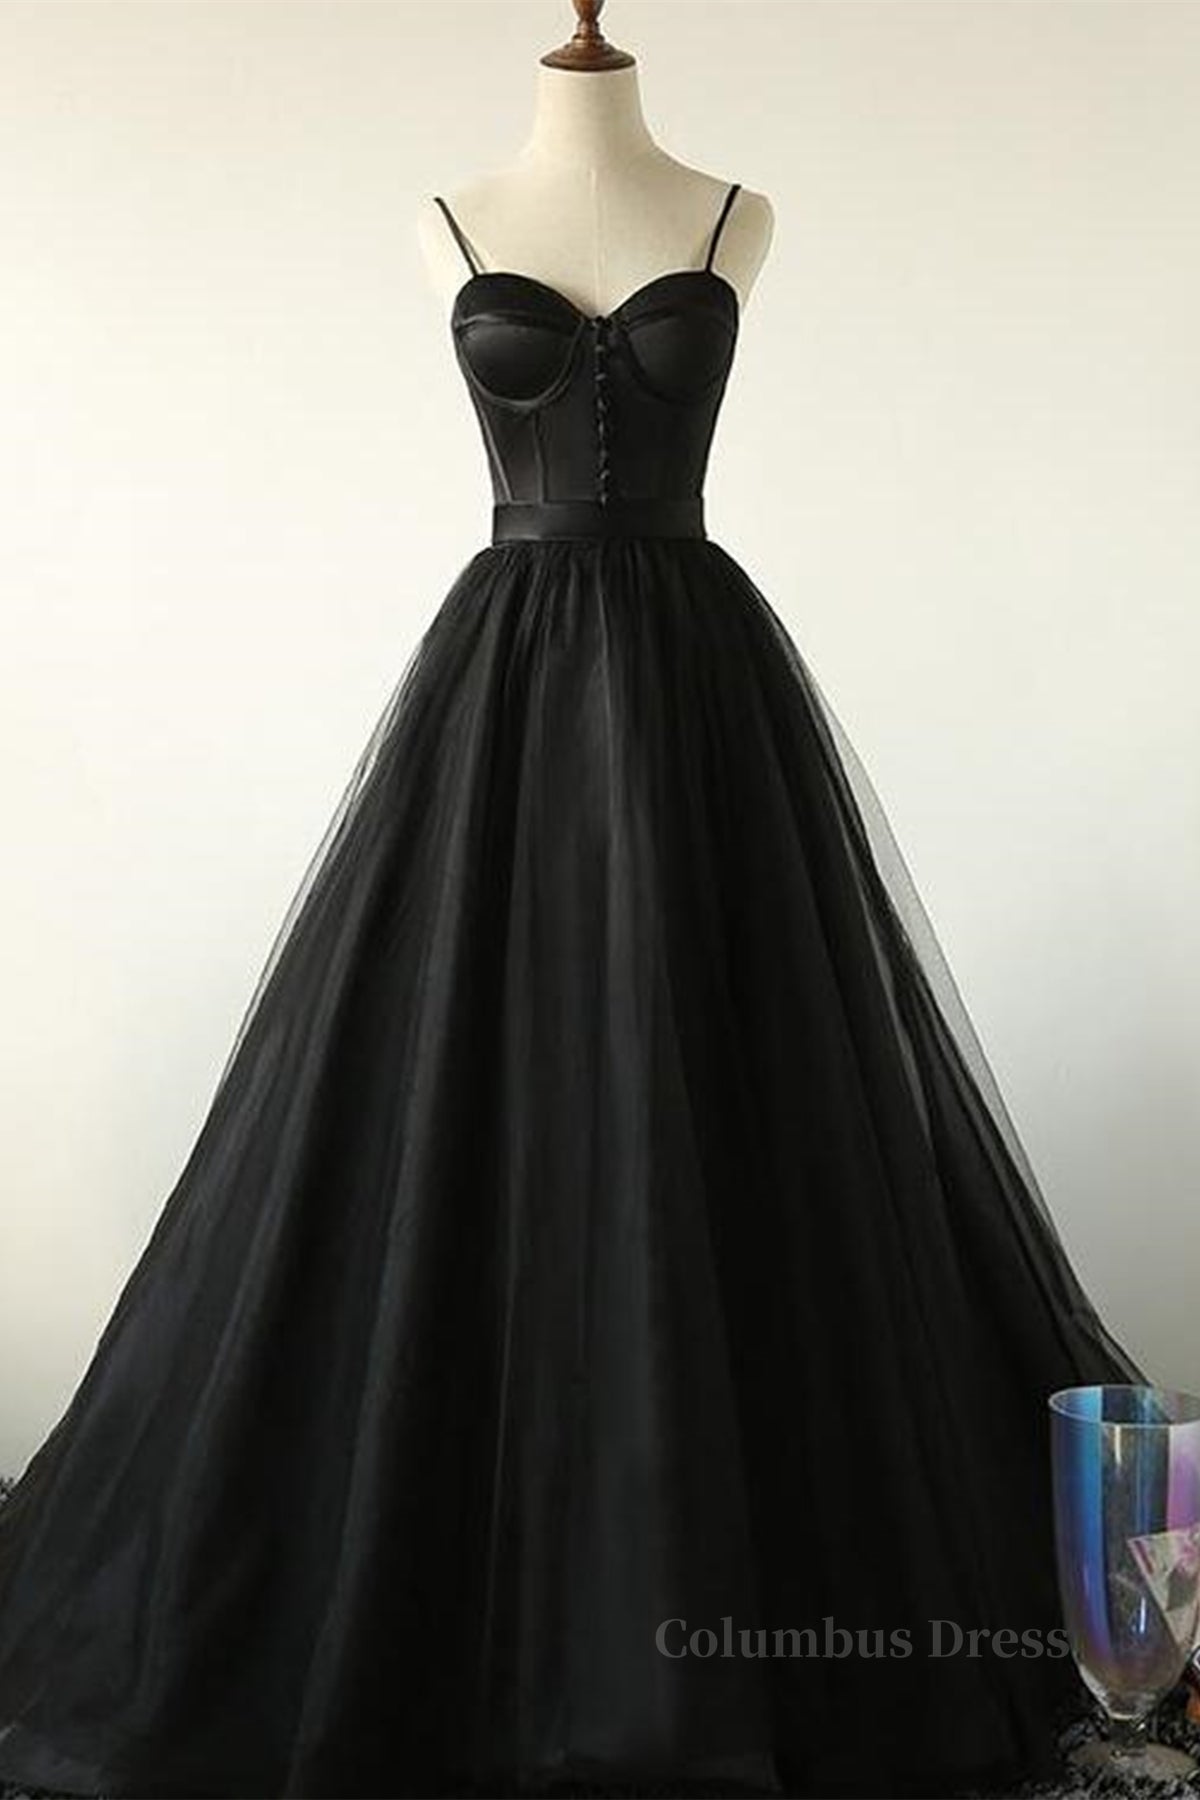 Sweetheart Neck Black Tulle Long Corset Prom Dress, Thin Straps Black Corset Formal Evening Dress, Black Corset Ball Gown outfits, Bridesmaids Dress Websites